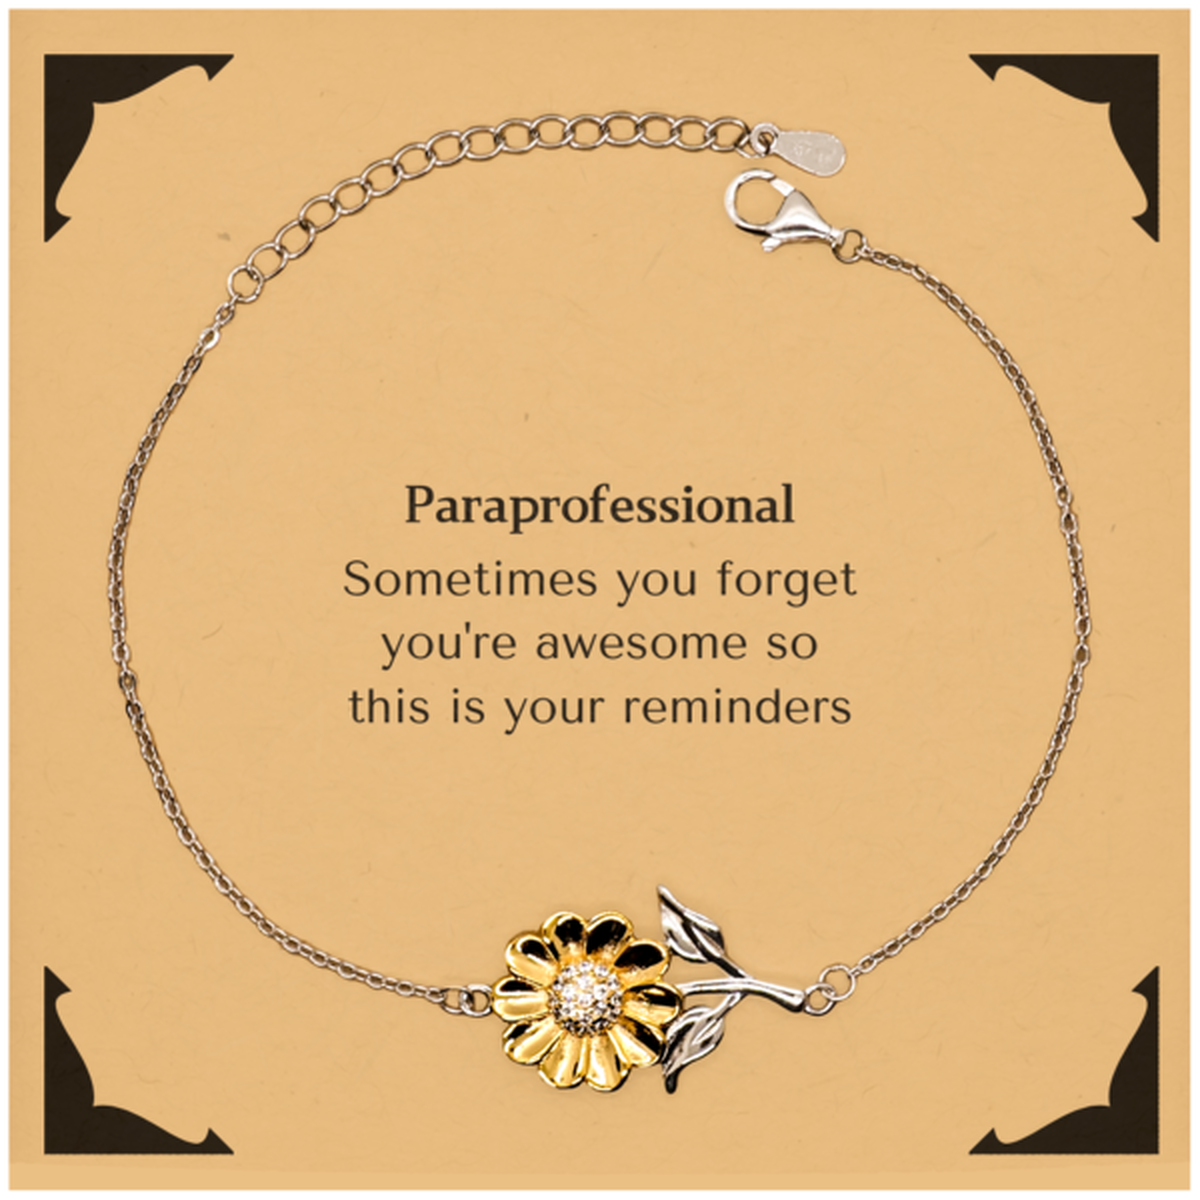 Sentimental Paraprofessional Sunflower Bracelet, Paraprofessional Sometimes you forget you're awesome so this is your reminders, Graduation Christmas Birthday Gifts for Paraprofessional, Men, Women, Coworkers